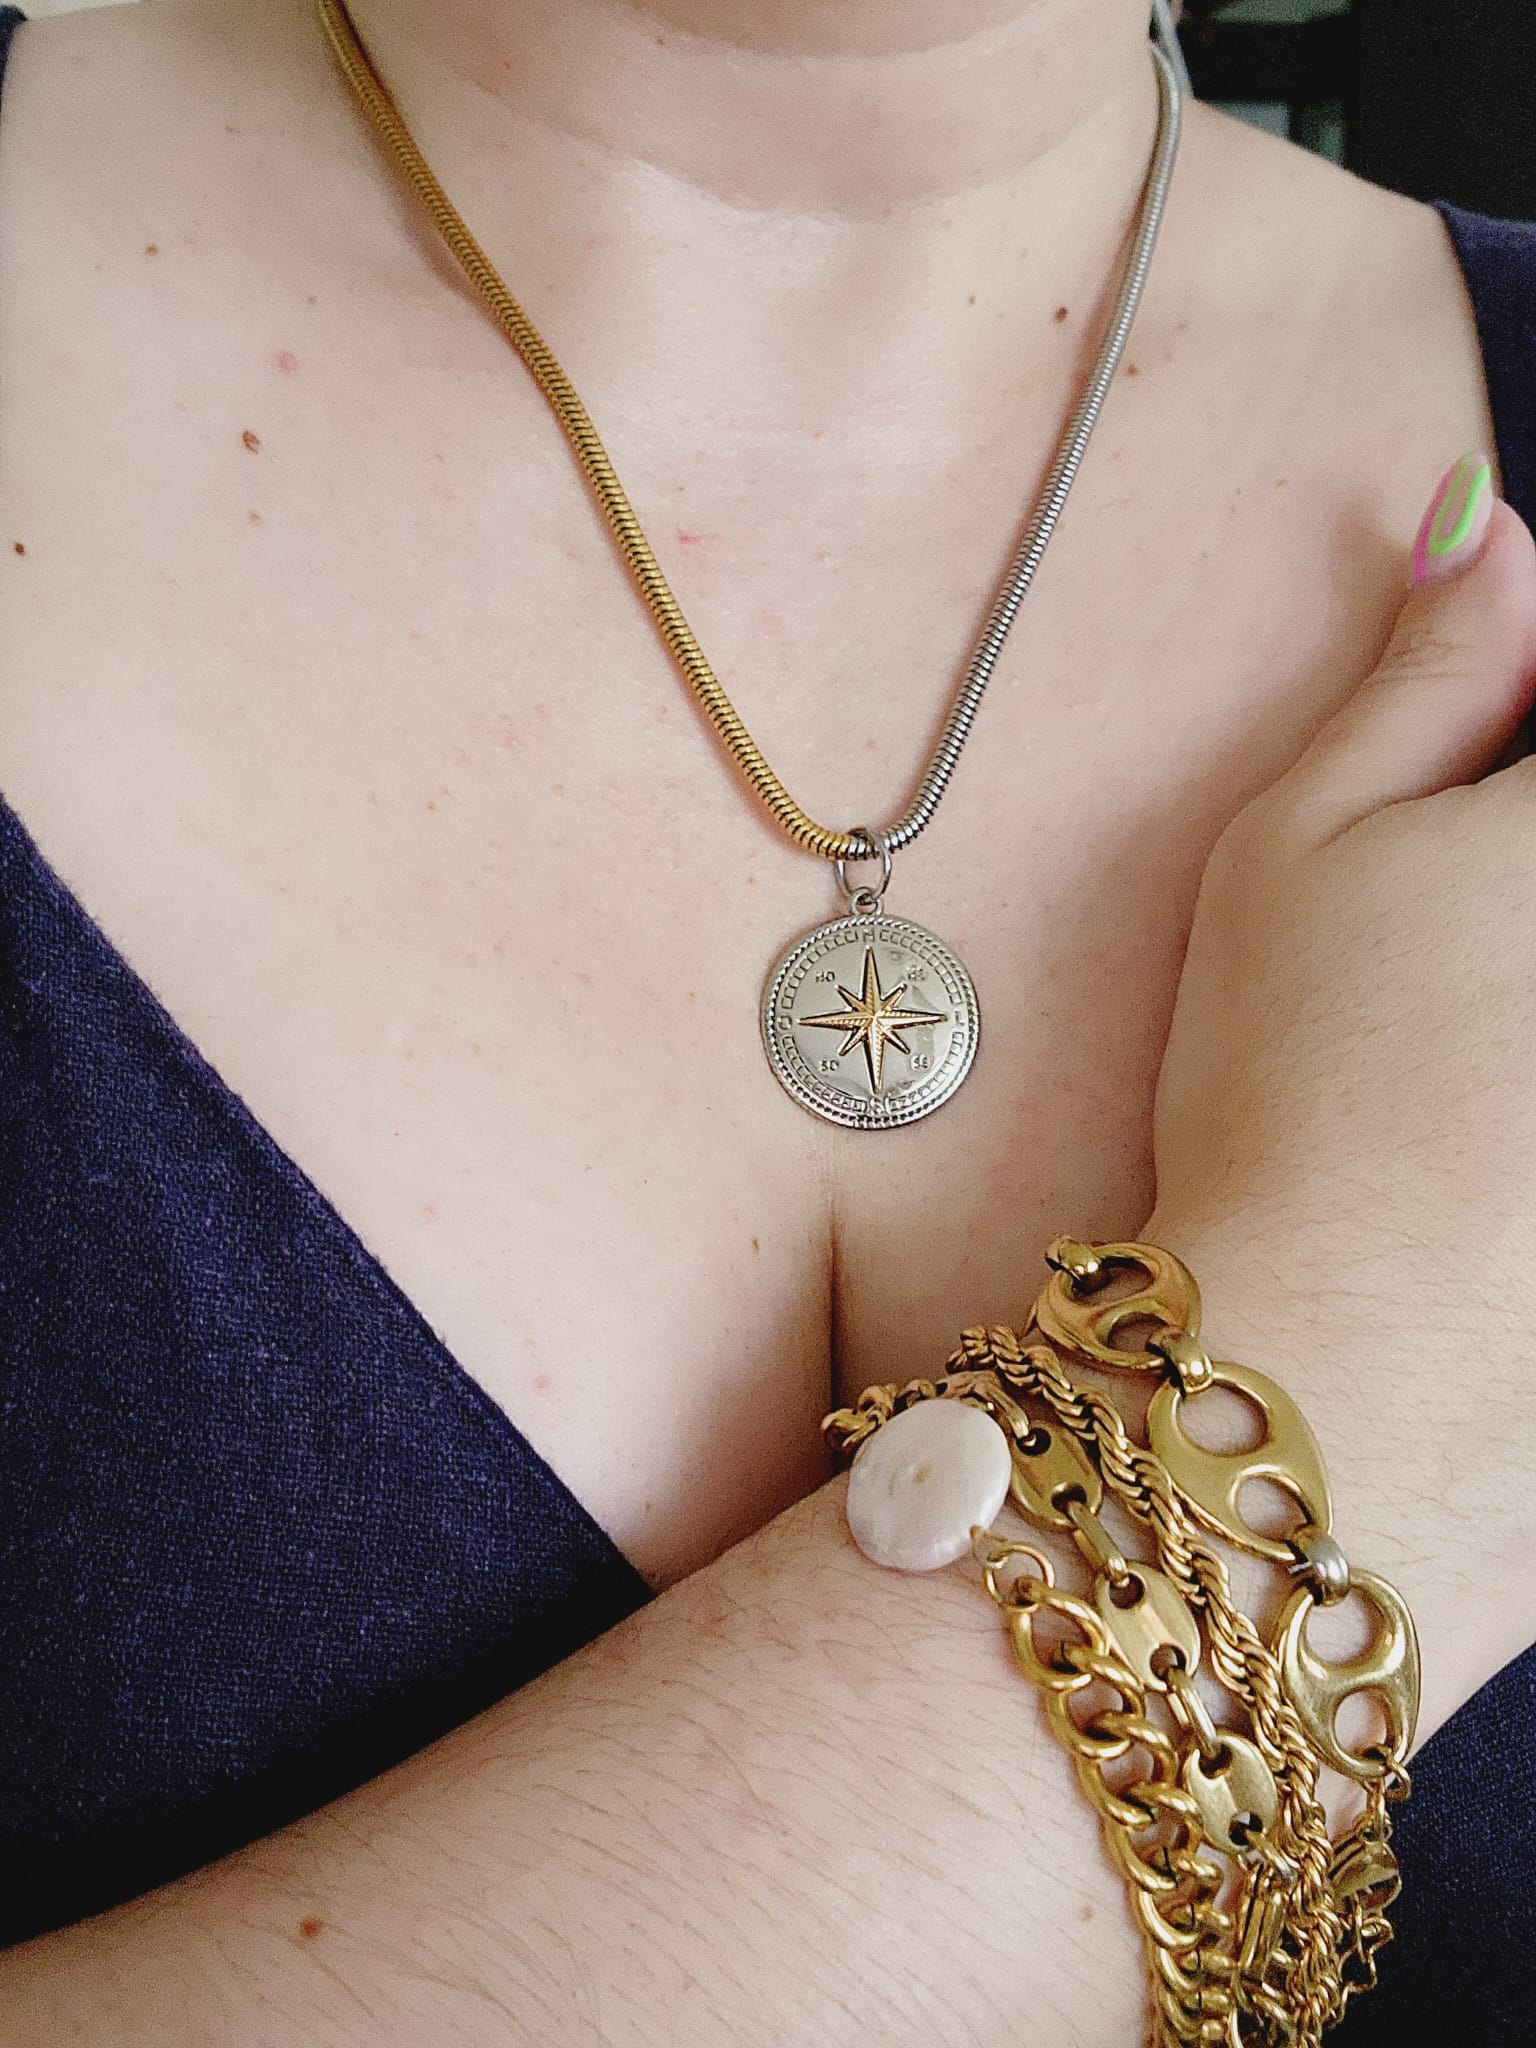 Compass Two Tone Necklace, Compass Gold Filled Necklace, Compass Rhodium Necklace, Compass Waterproof Necklace, Travel Gold Filled Necklace, Brujula Gold Filled Necklace, Compas collar en Gold filled, Meaningful Necklace, Explore the World Necklace, Enjoy your life Necklace, Motivational Necklace, Inspirational Necklace, Gift for Travel Lover, Travel Lover Jewelry, adventurous woman Gift, Adventurous woman jewelry, Vintage Compass Pendant, waterproof two tone necklace